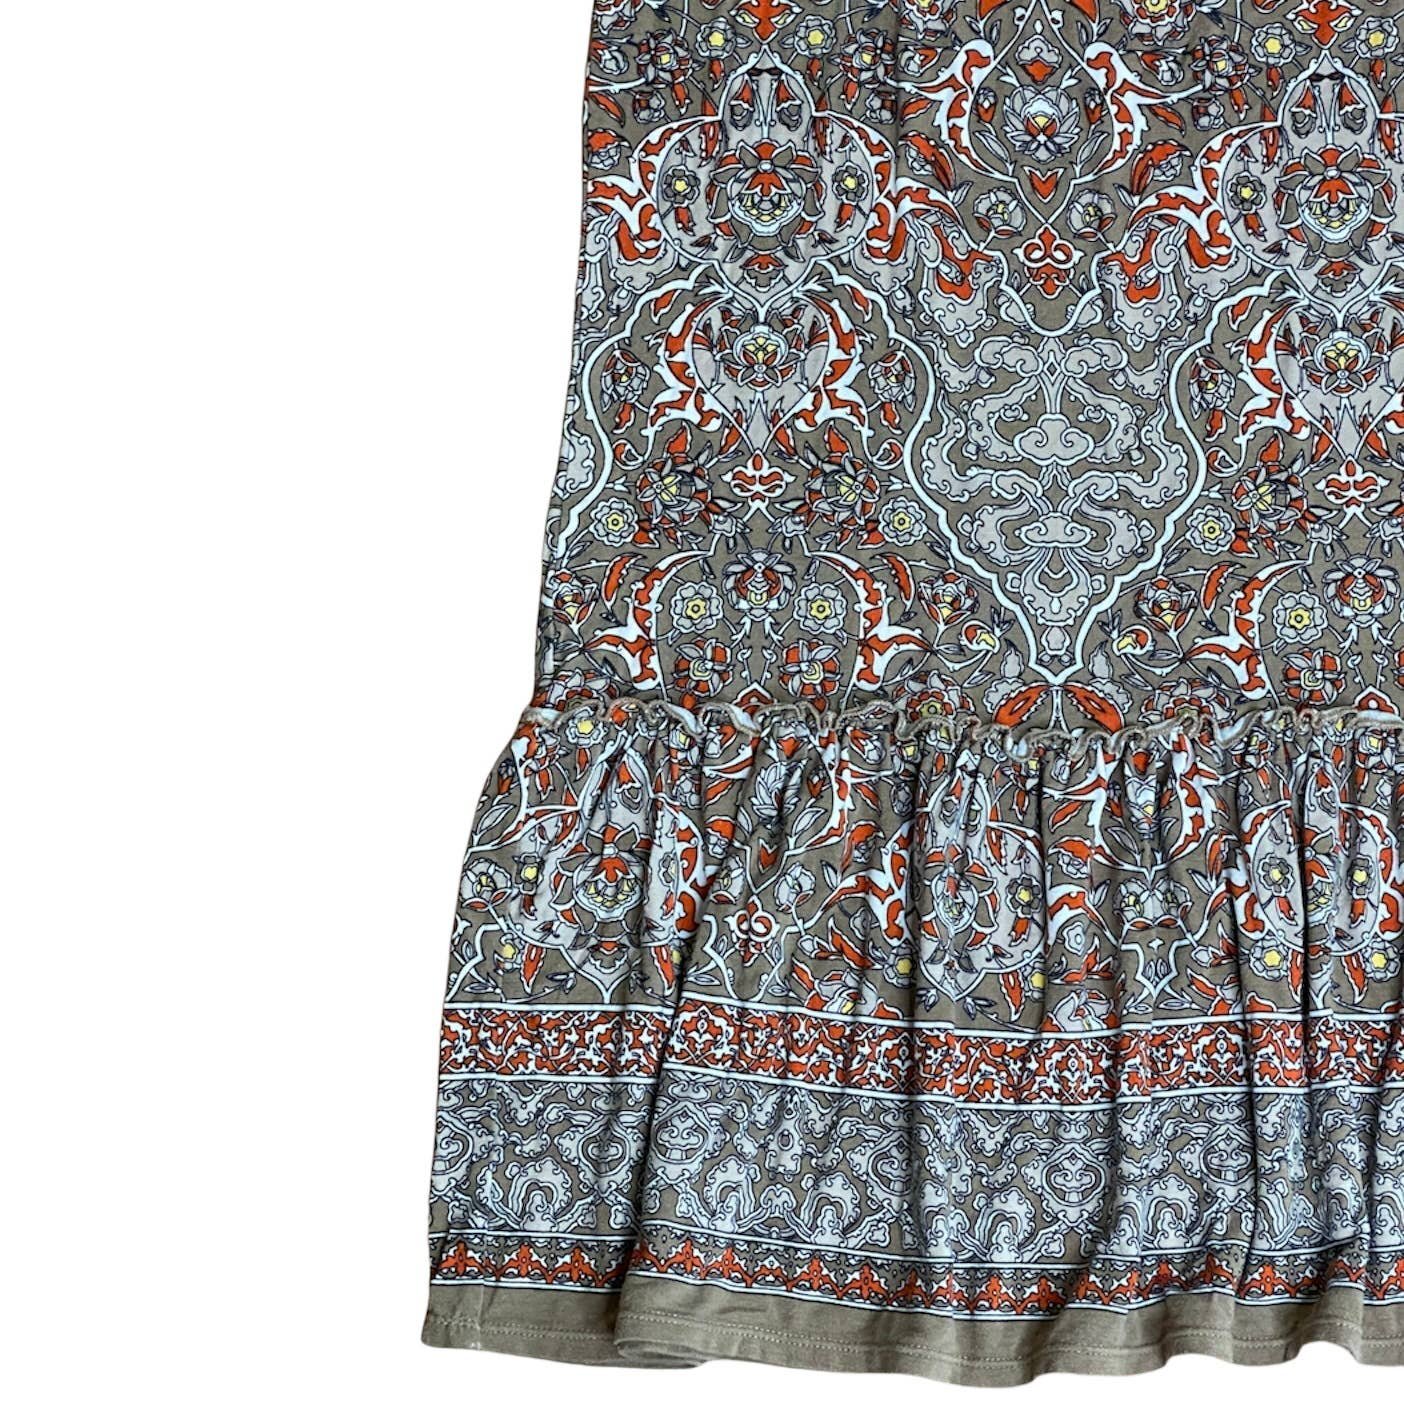 Personality Bohemian Moroccan Neutral Toned Maxi Skirt Size Medium Max Edition JDeECbSUk Store Online